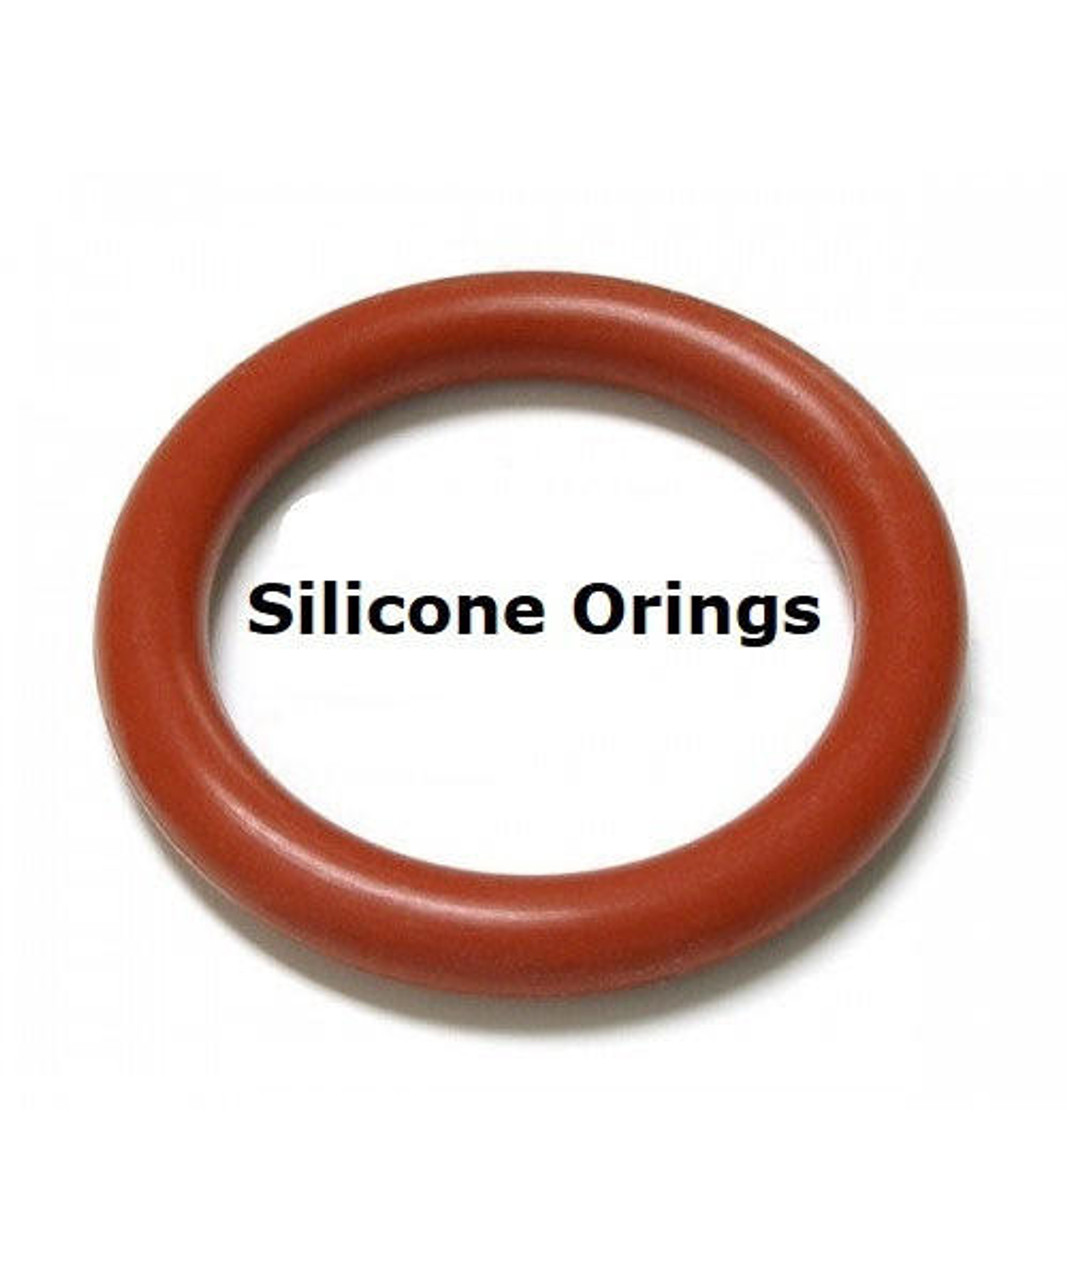 Silicone O-rings Size 276        Price for 1 pc